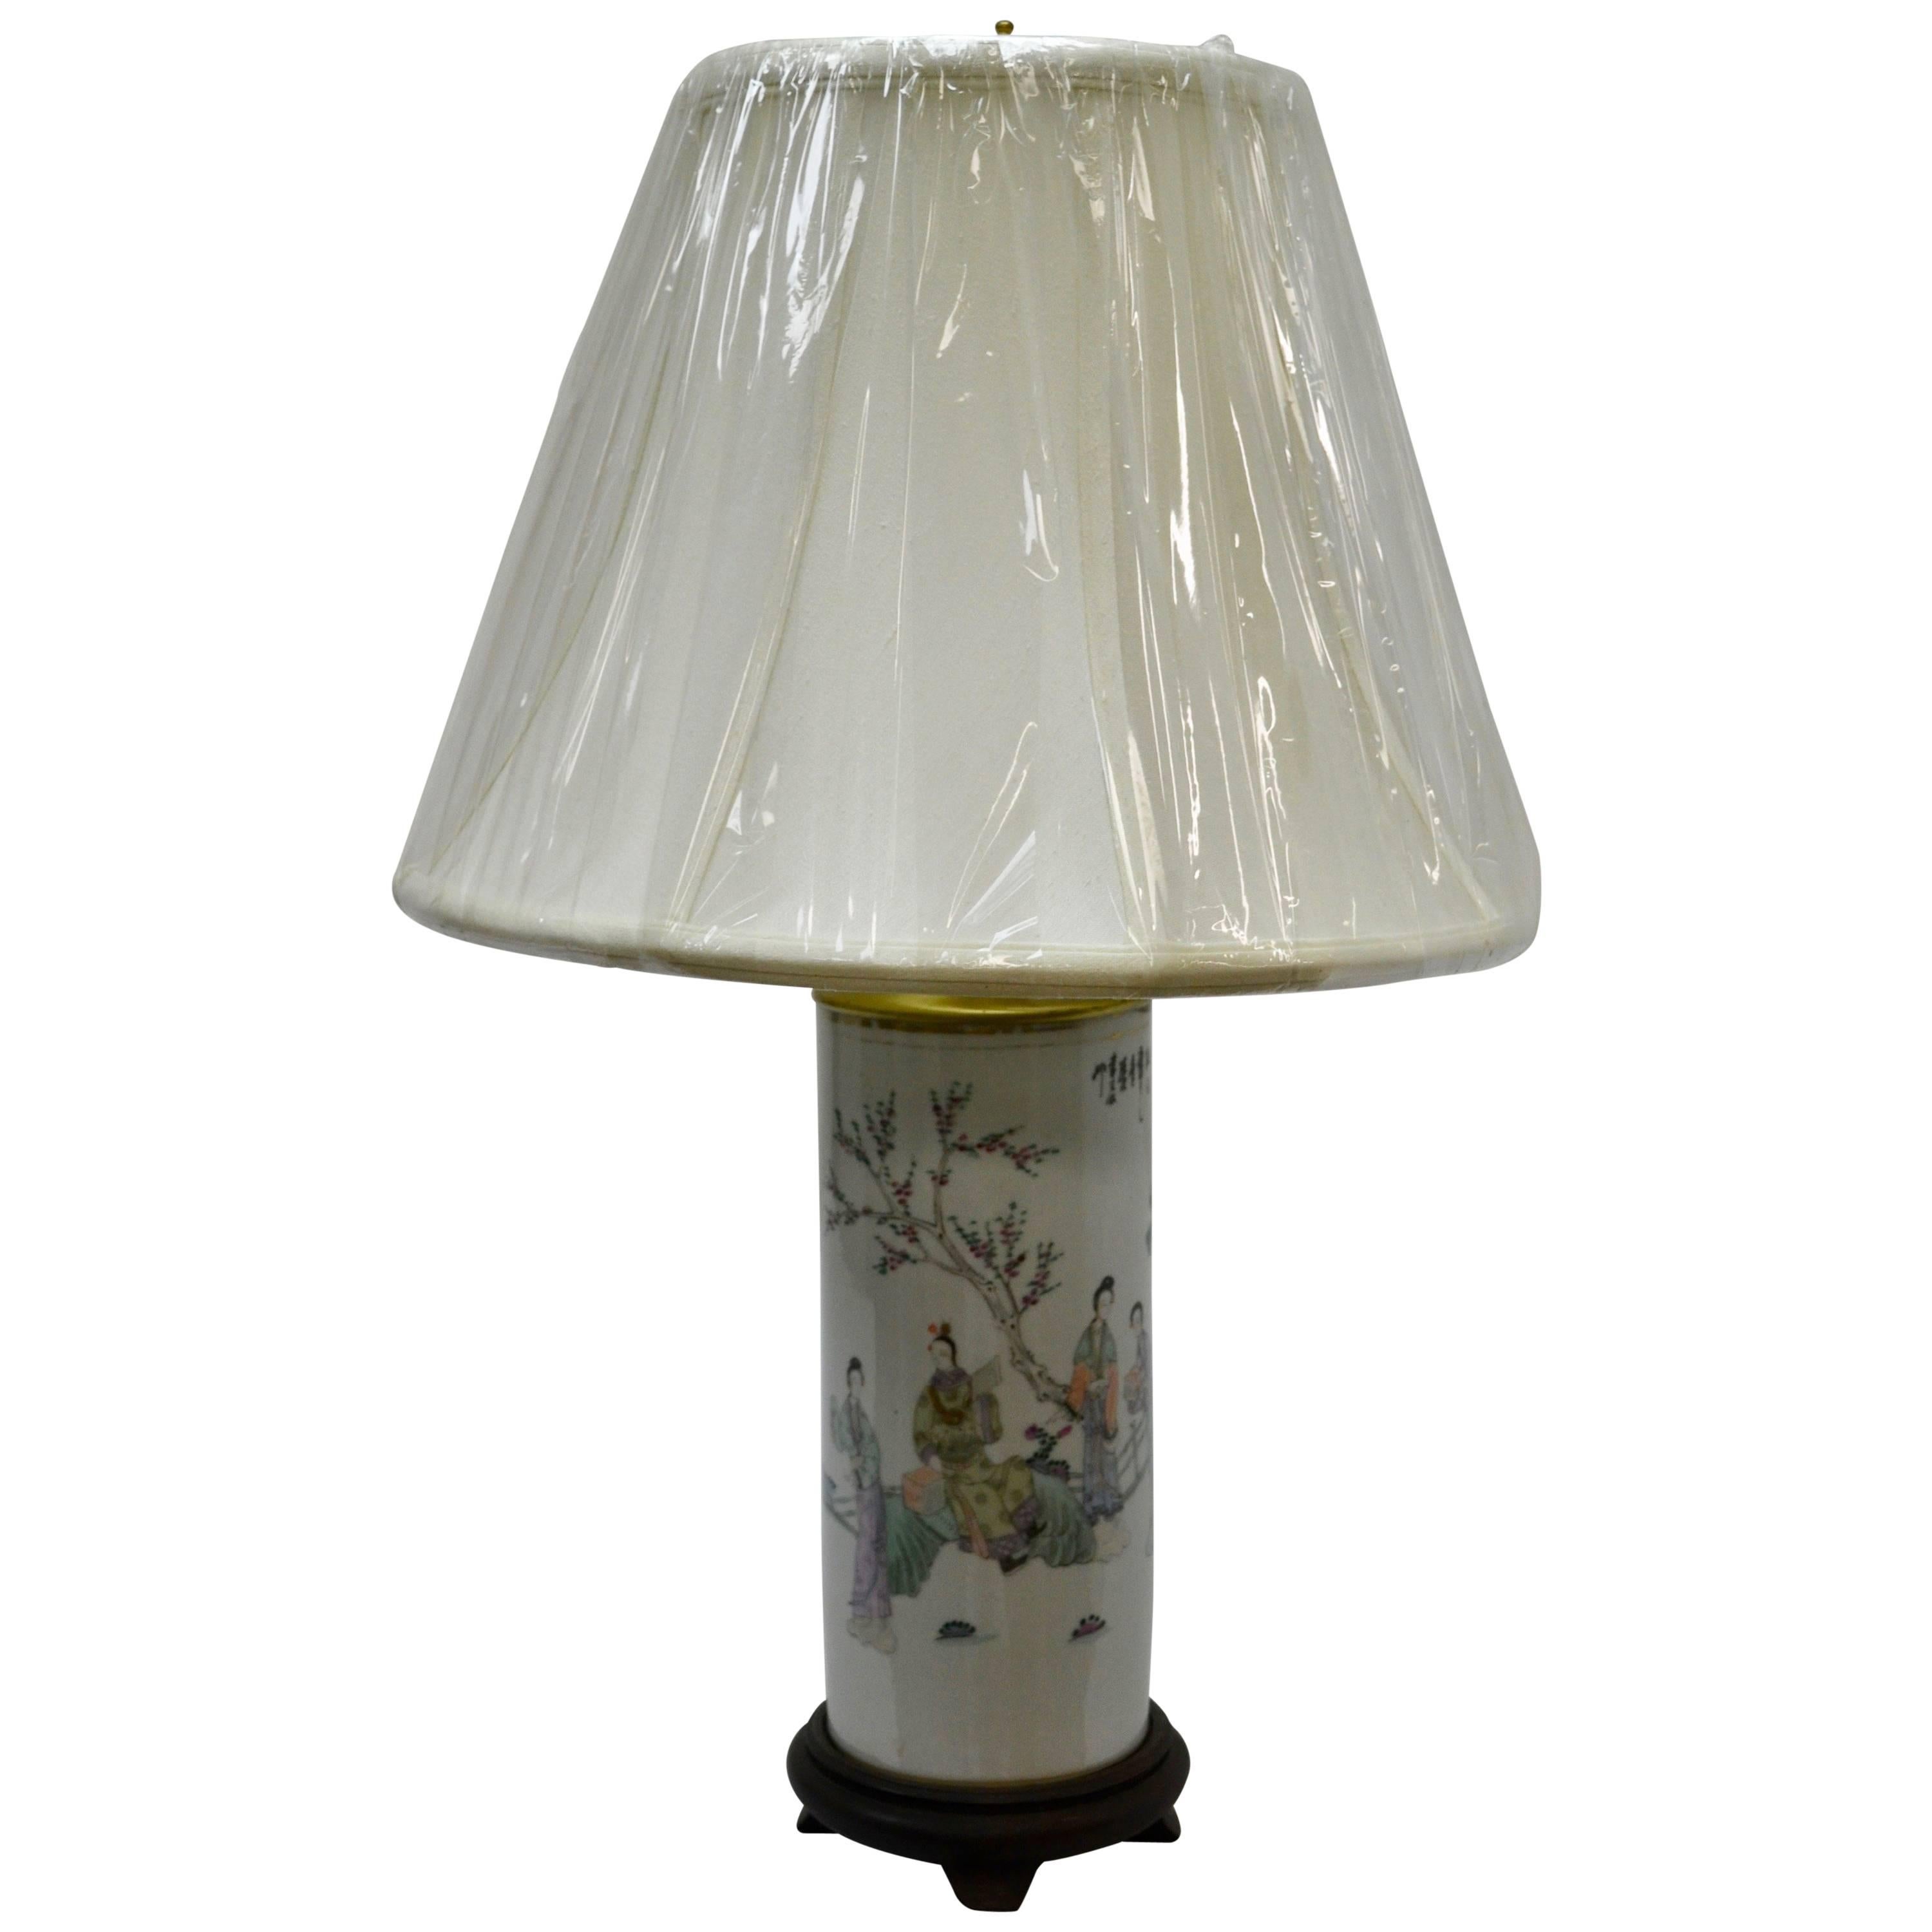 Chinese Porcelain Hat Stand Table Lamp